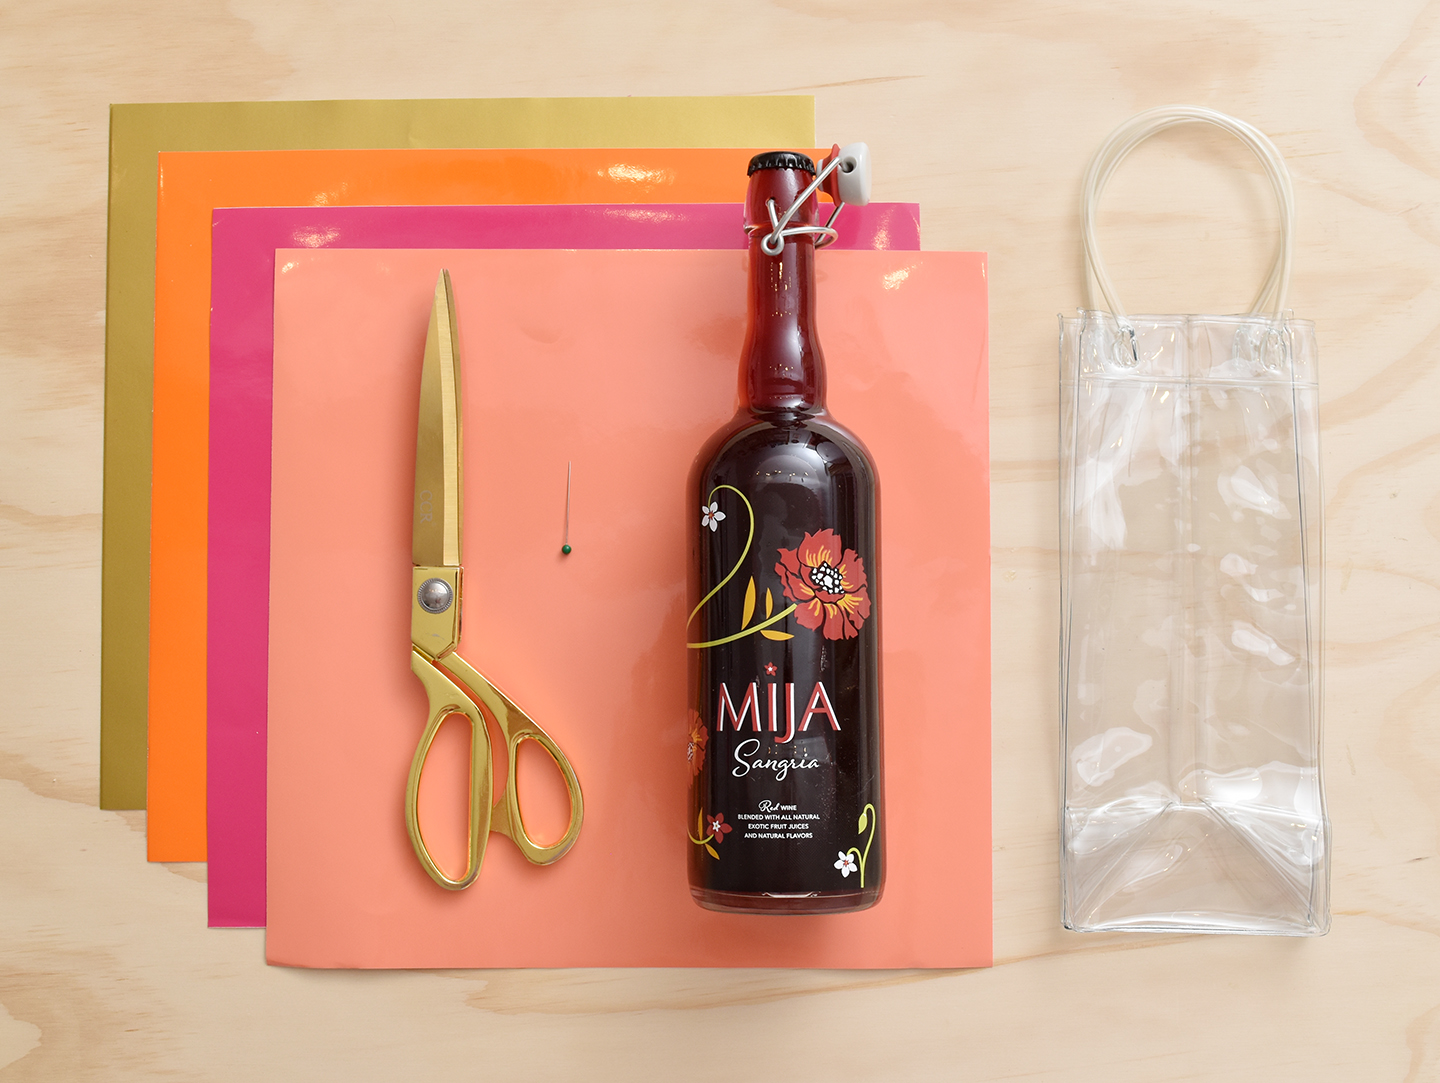 DIY Wine Bag: Chill Your Wine In Style! /// By Faith Provencher of Design Fixation with 90+ Cellars #diy #wine #bag #chiller #vinyl #plastic #gift